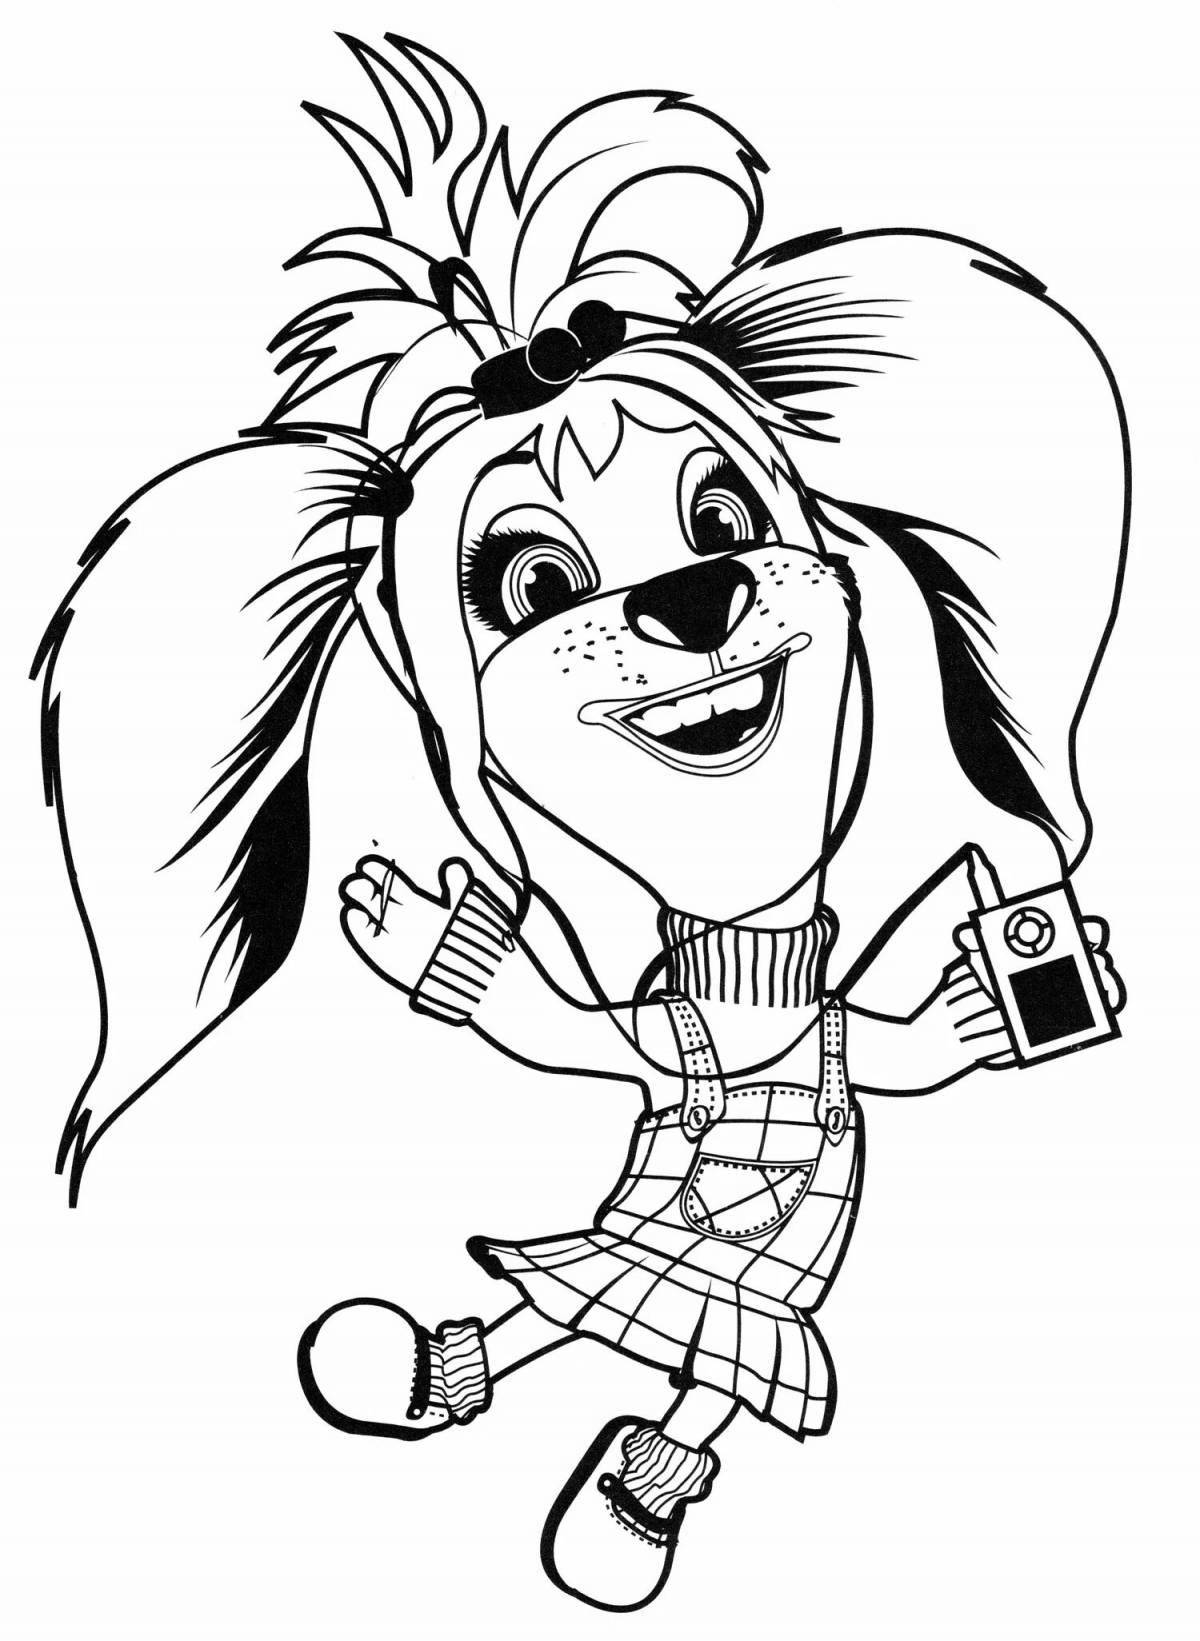 Cute barboskin coloring pages for girls